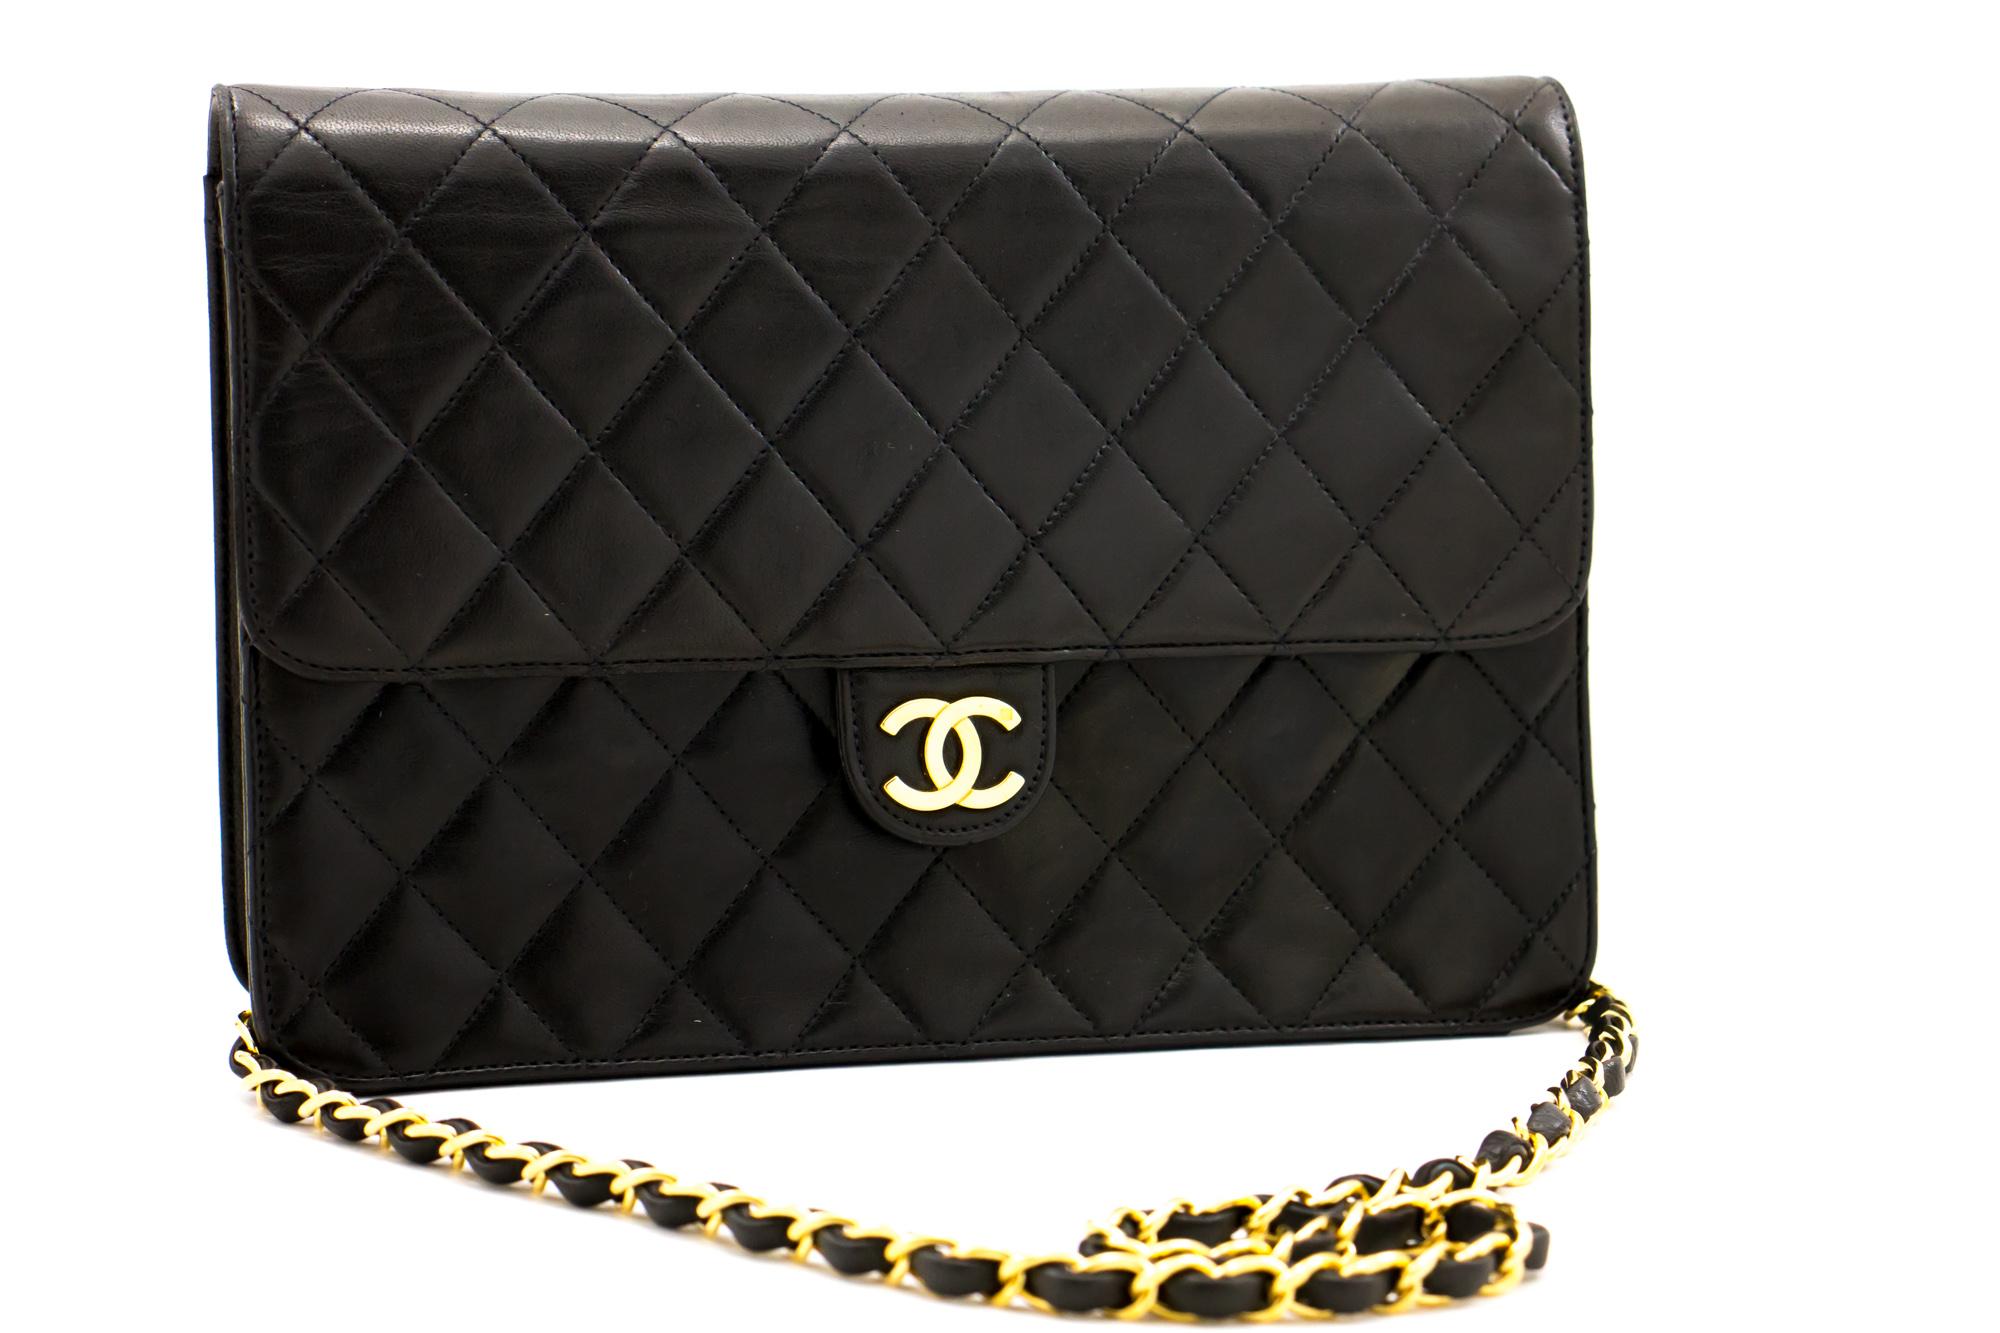 An authentic CHANEL Chain Shoulder Bag Clutch Black Quilted Flap made of black Lambskin. The color is Black. The outside material is Leather. The pattern is Solid. This item is Vintage / Classic. The year of manufacture would be